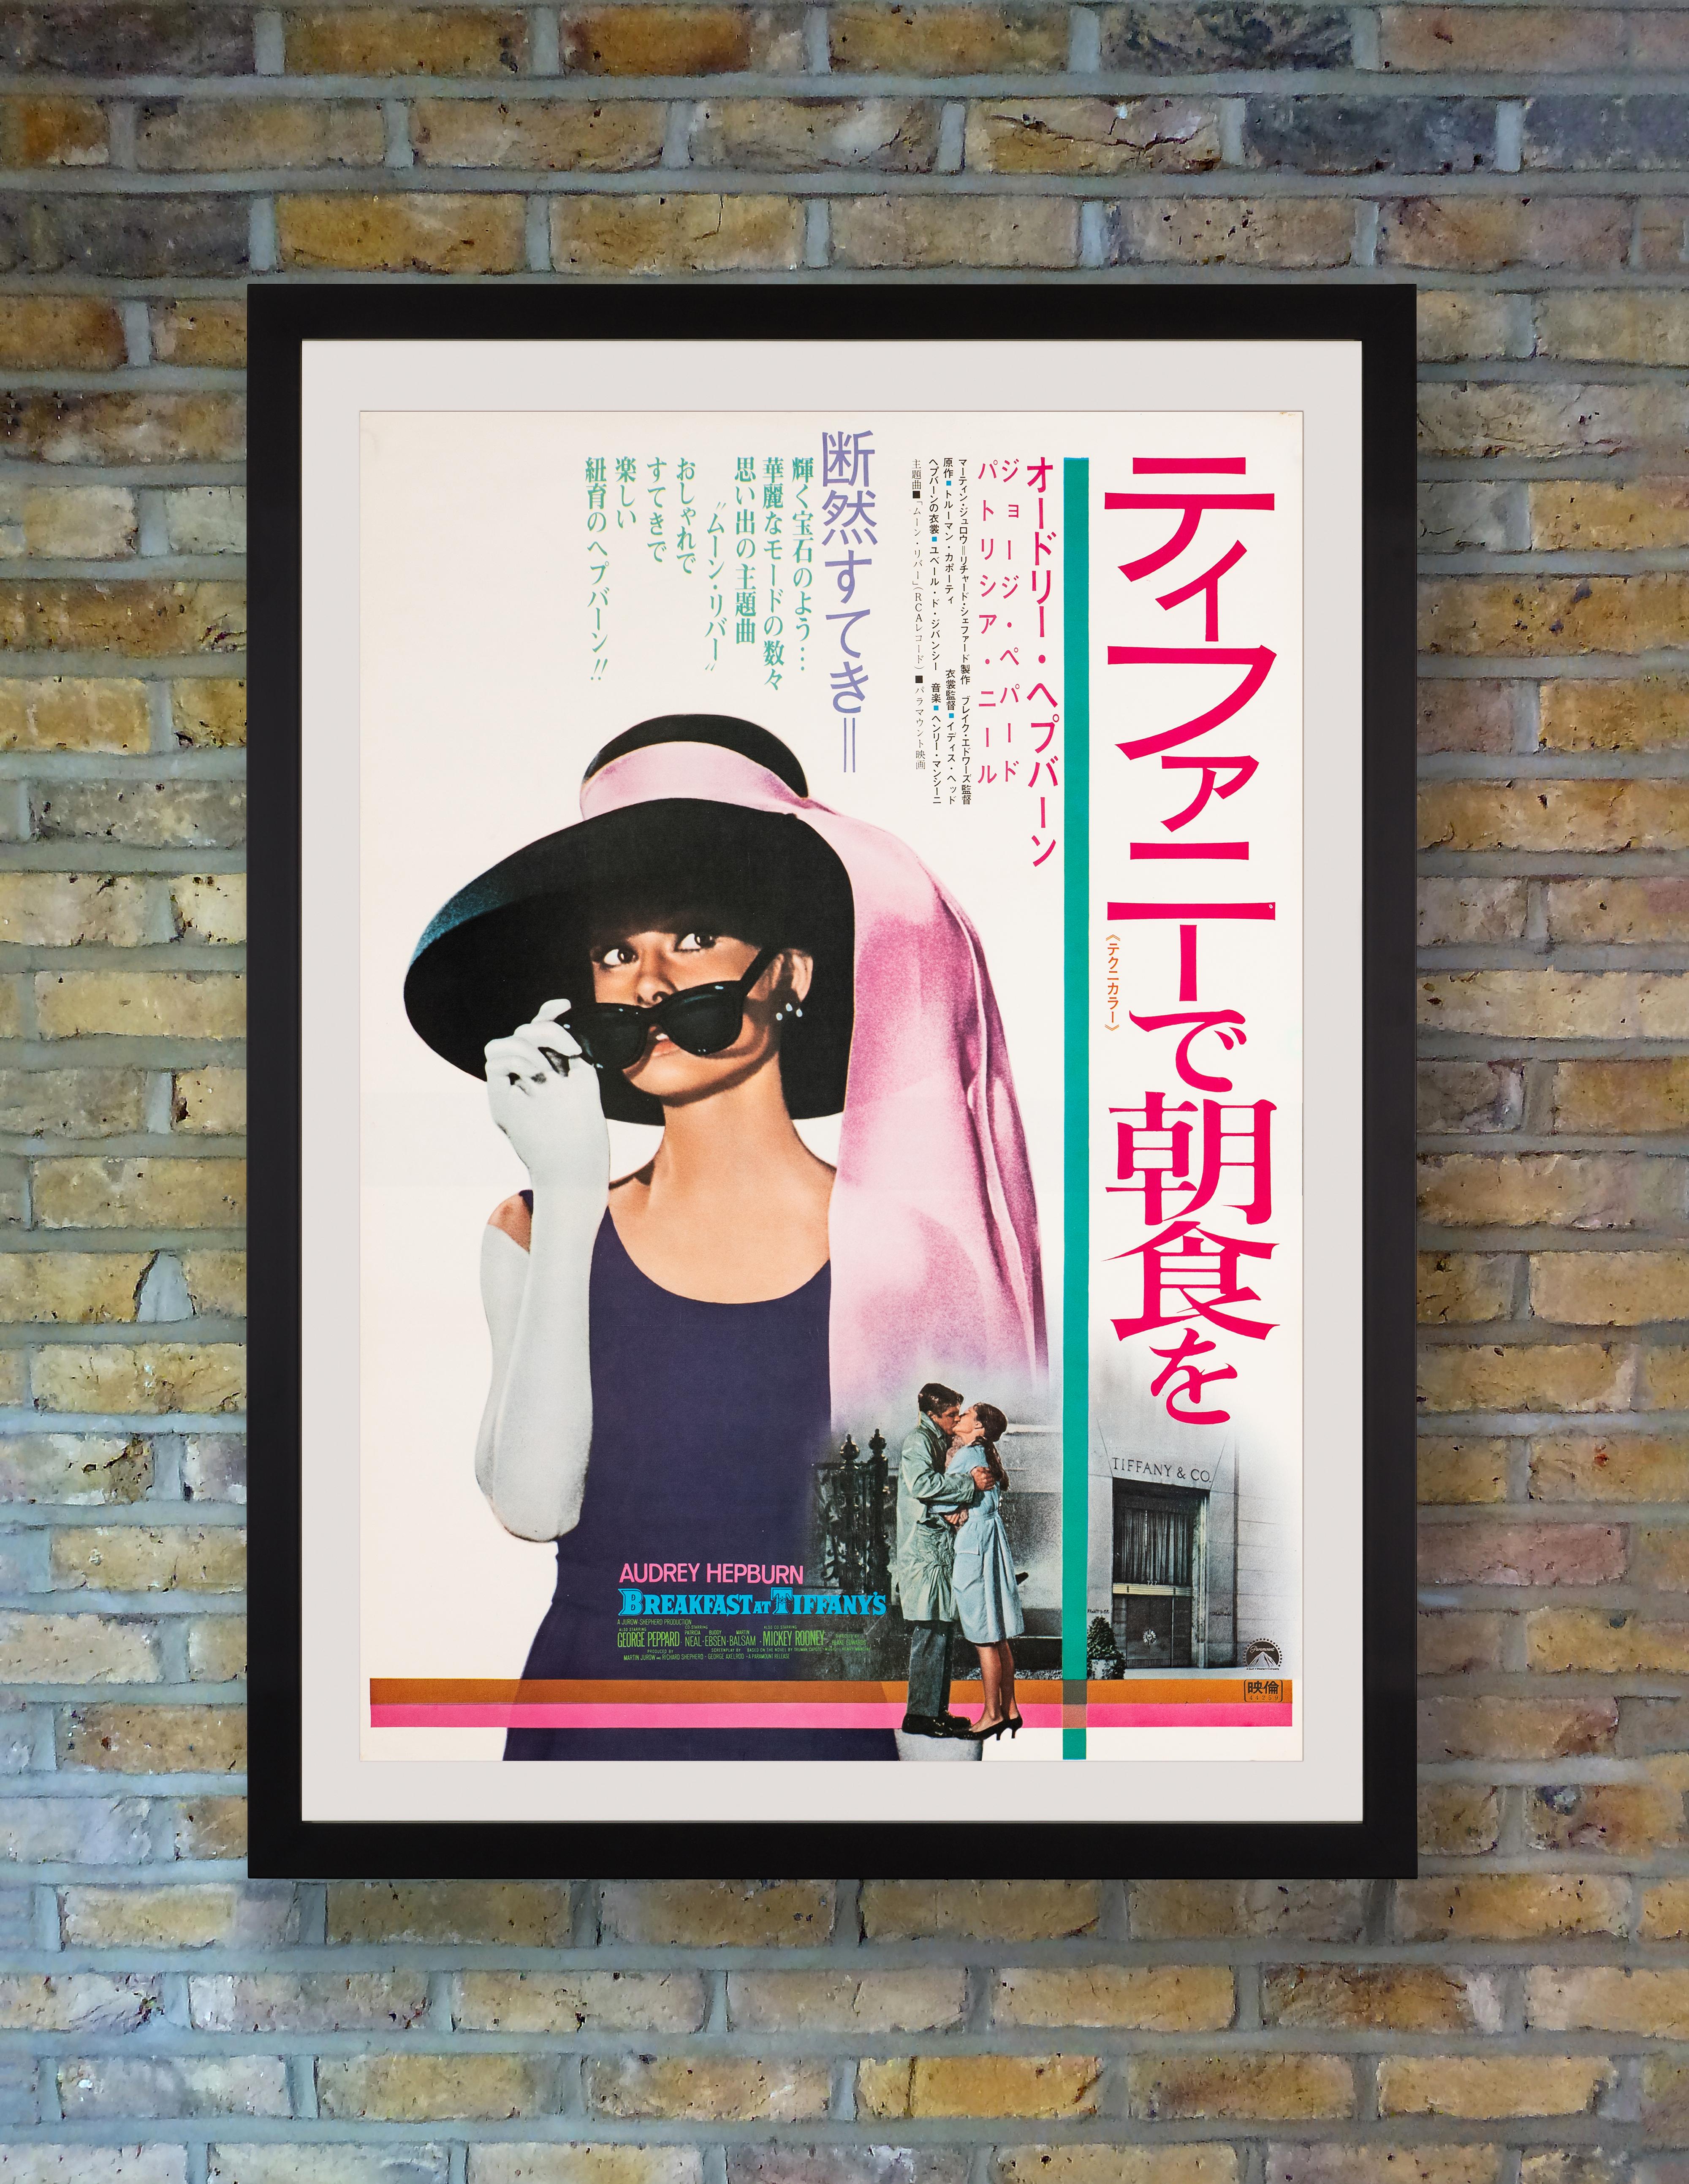 Candy colors combine to perfection with the adorable Audrey on this charming Japanese B2 poster for a 1969 re-release of the perennially popular 'Breakfast at Tiffany's.' Holly Golightly would be Audrey Hepburn’s defining role, establishing her